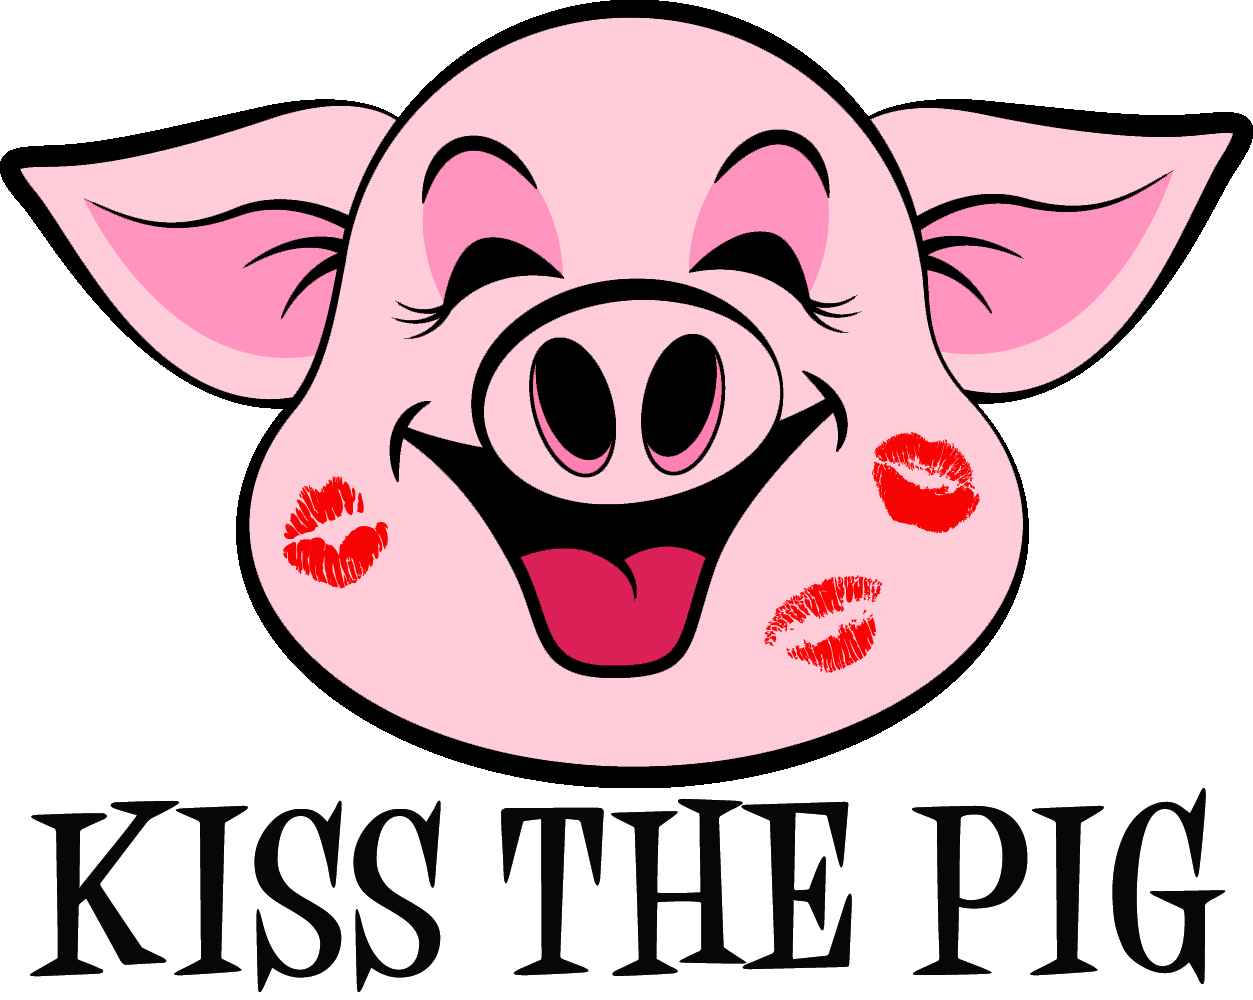 Pig Bbq Cartoon | Free download on ClipArtMag